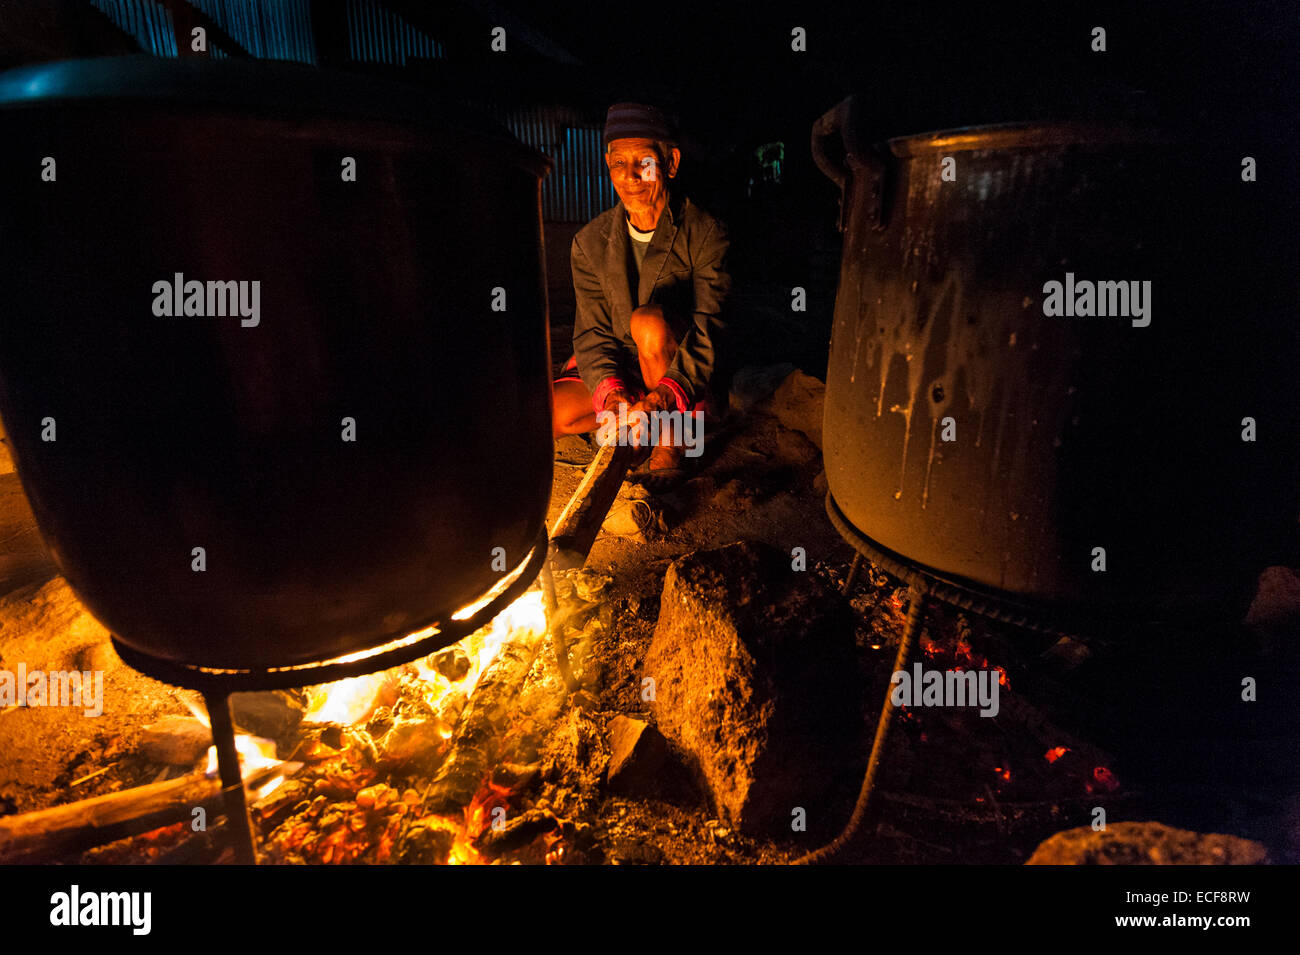 Cooking over an open fire for entire community Stock Photo